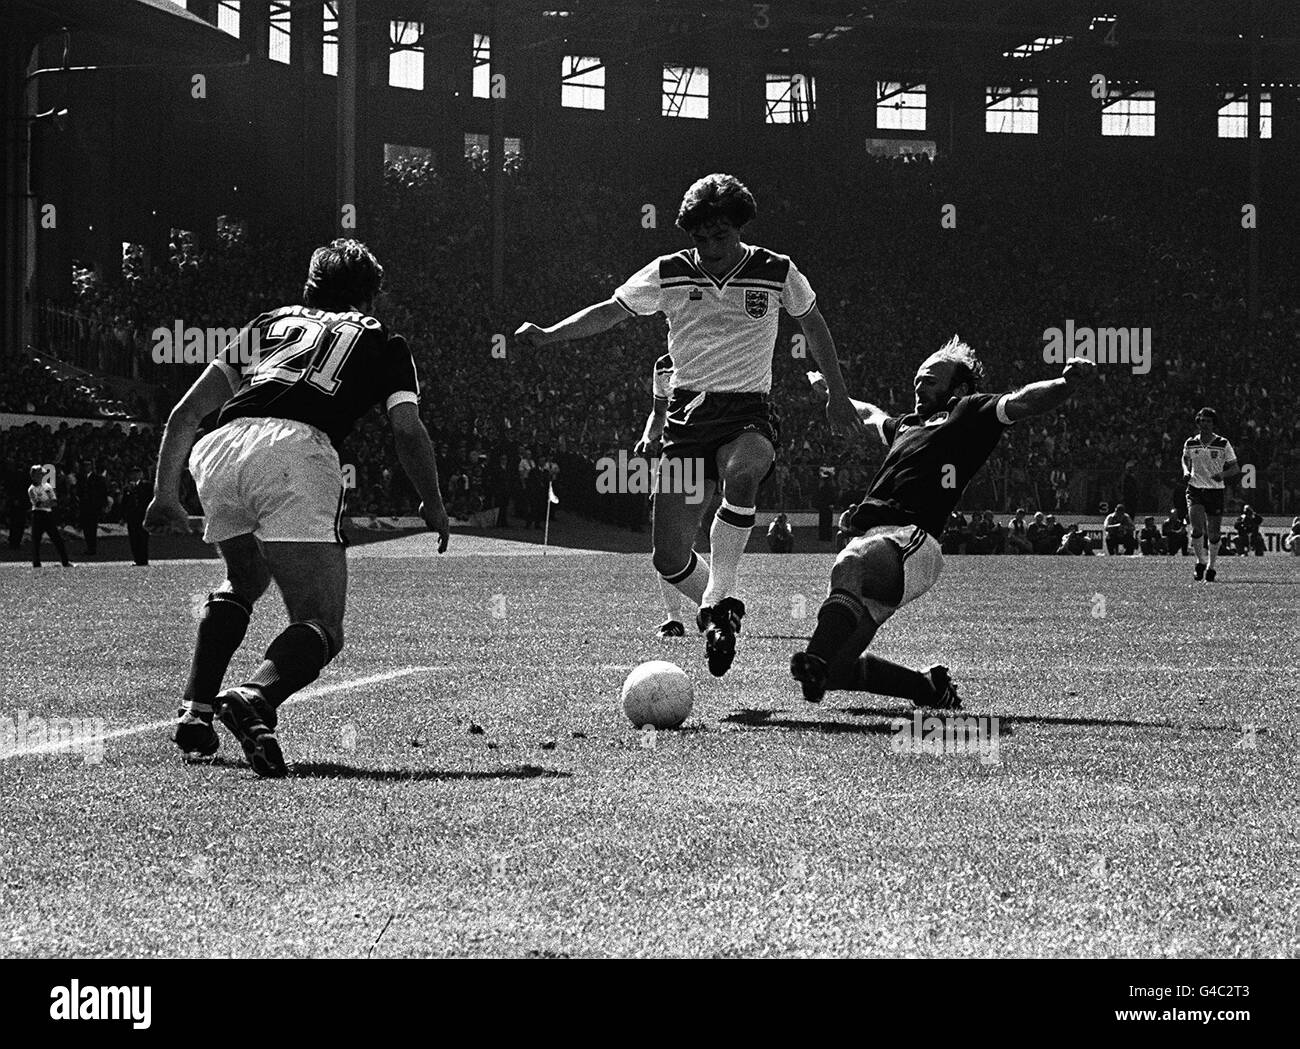 England's Steve Coppell (centre) retains possession despite the tackle from Scotland captain Archie Gemmill during the international match at Hampden Park, Glasgow. Stock Photo